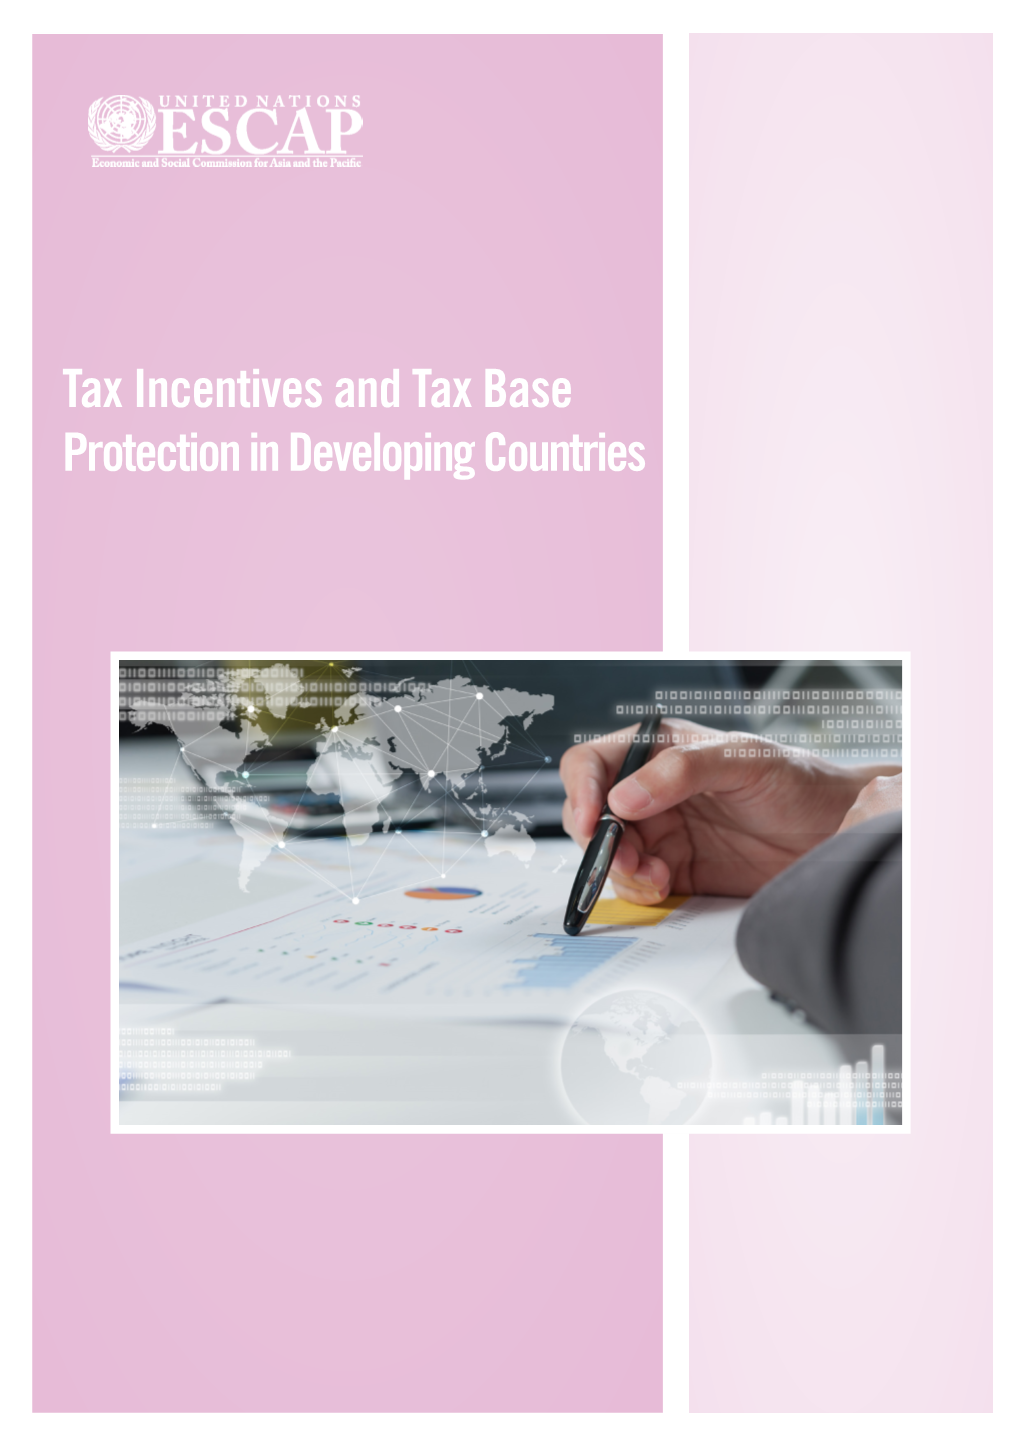 Tax Incentives and Tax Base Protection in Developing Countries